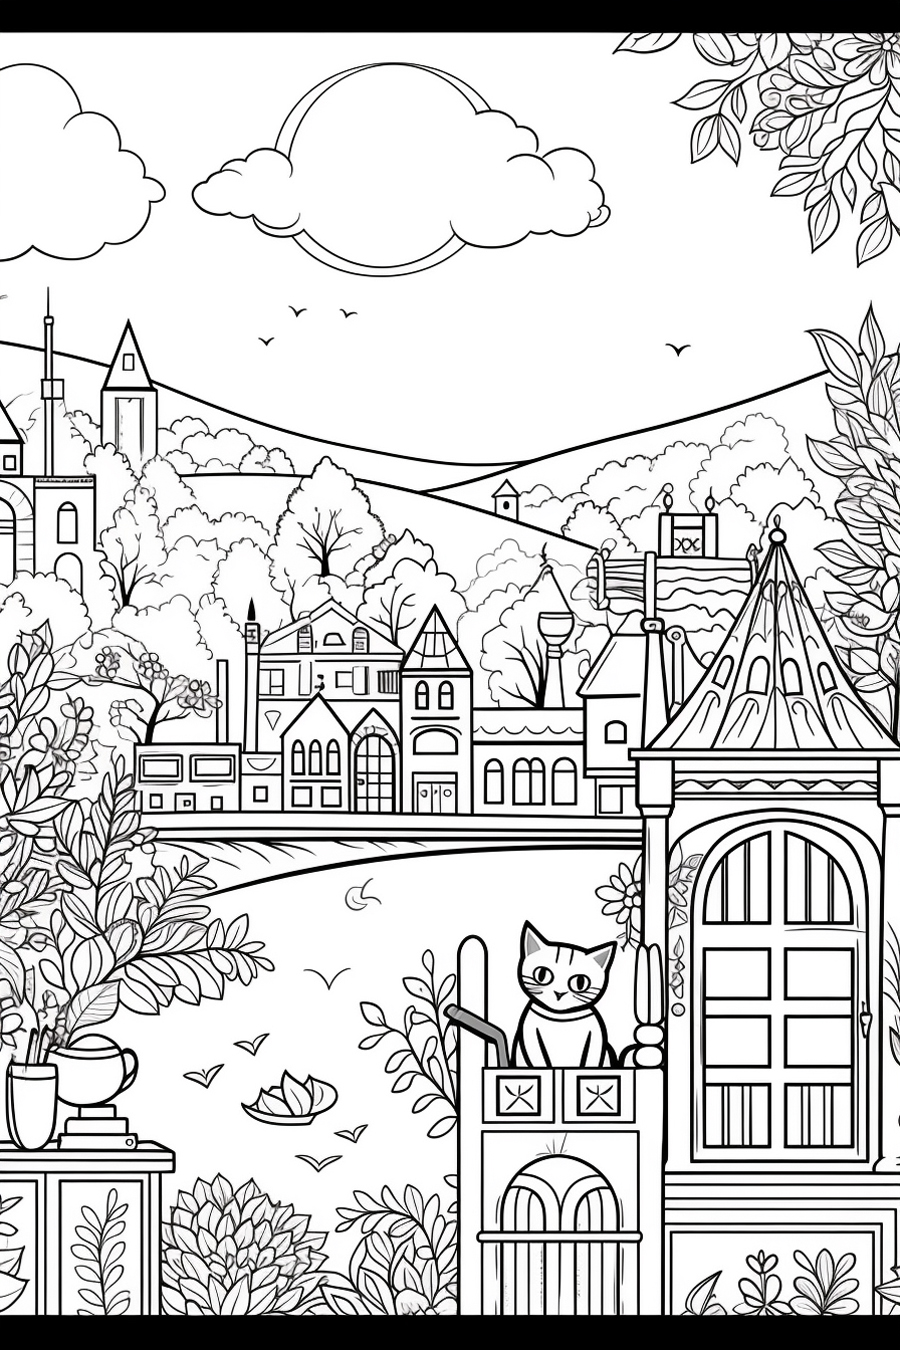 A black and white drawing of a city with a cat on top.